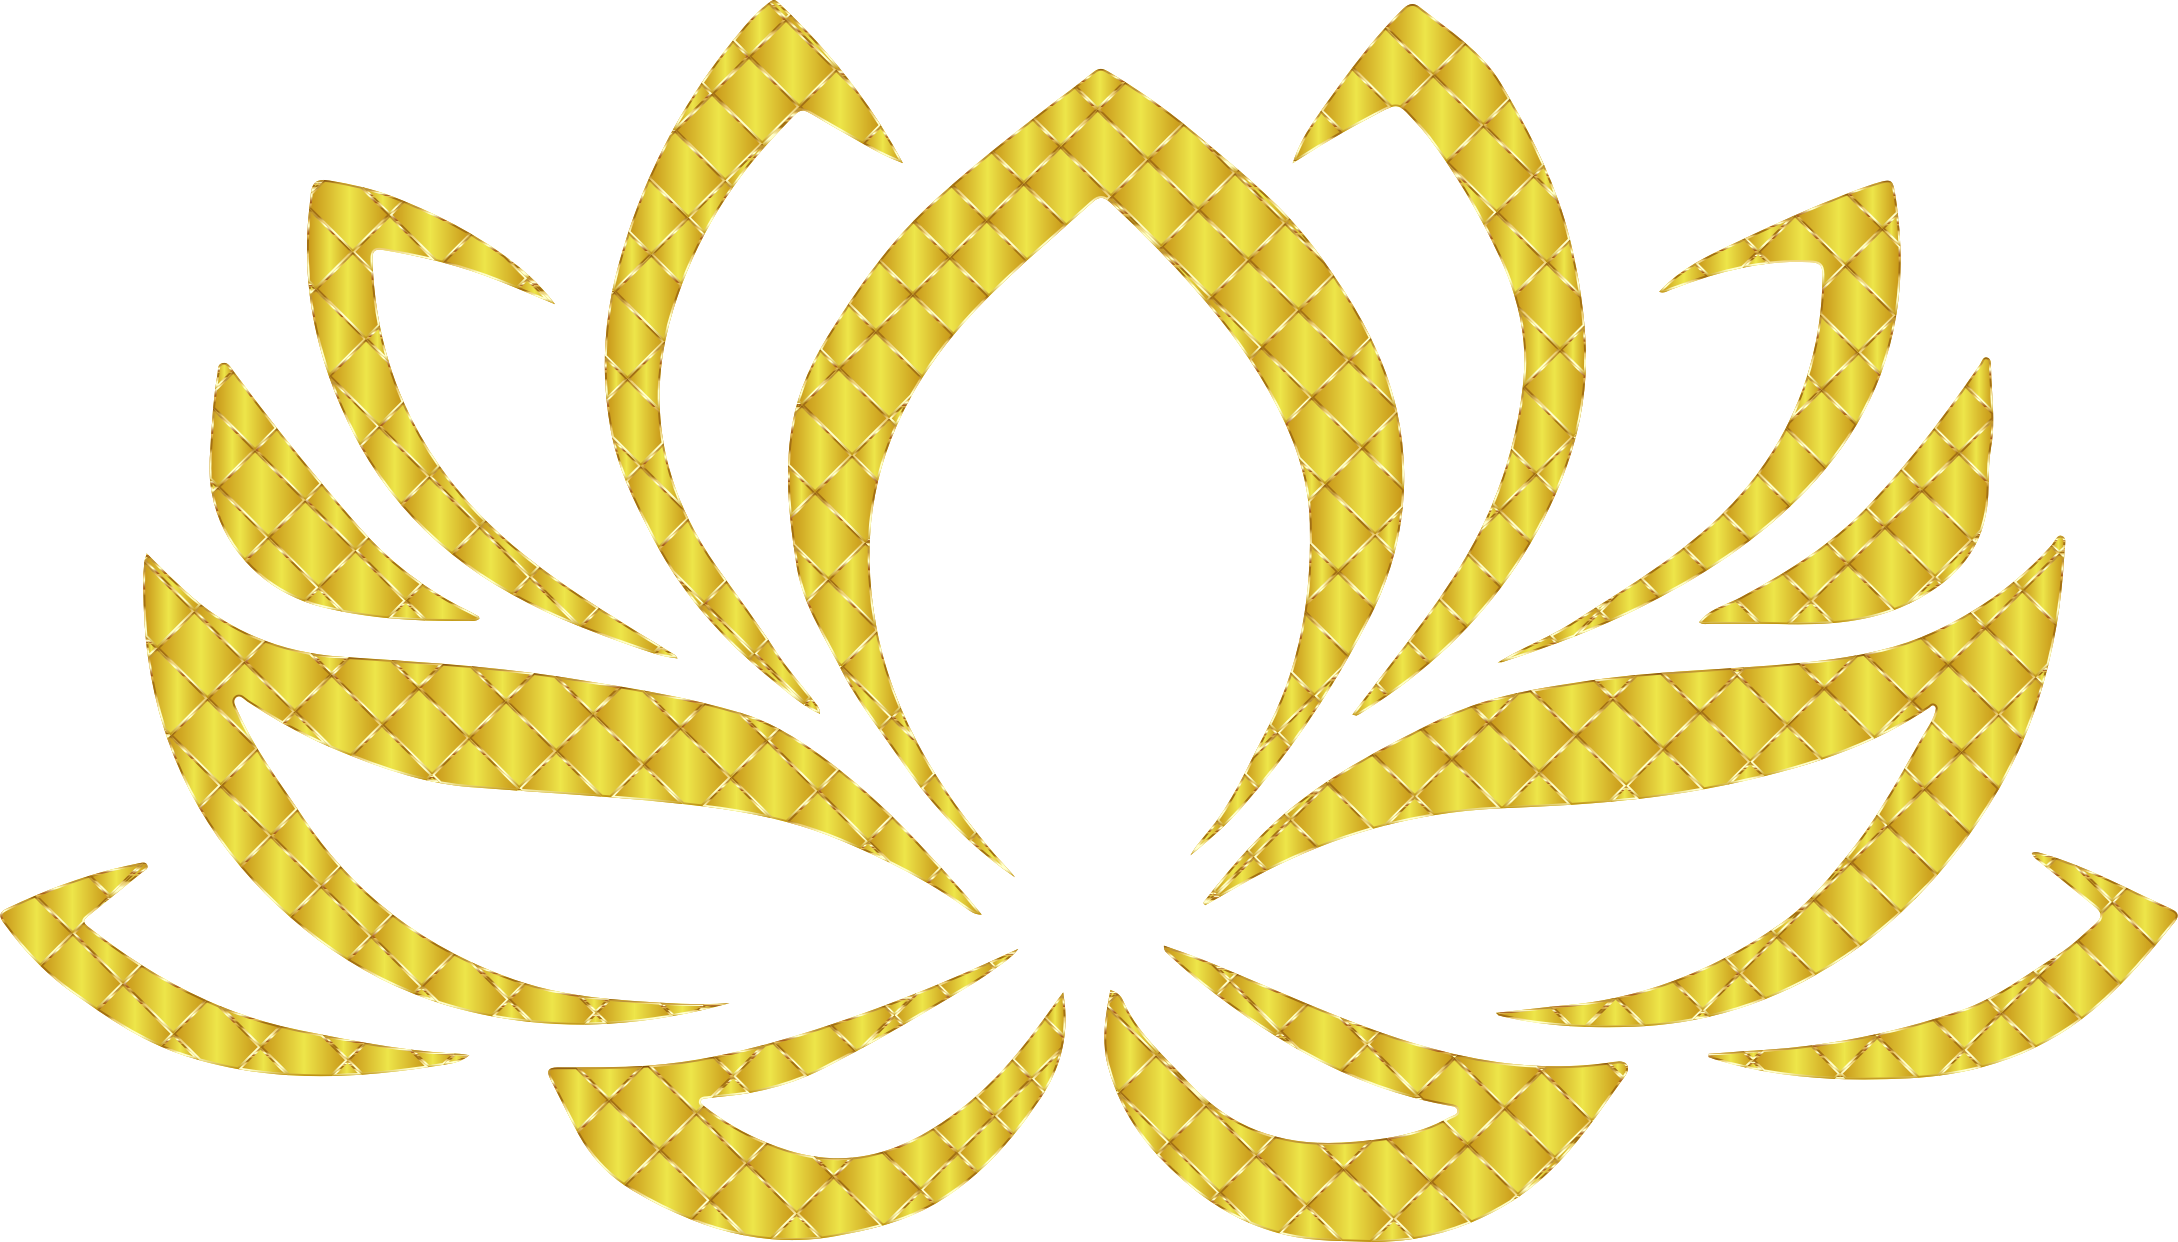 Golden Lotus Flower 3 No Background Icons PNG - Free PNG and Icons ...